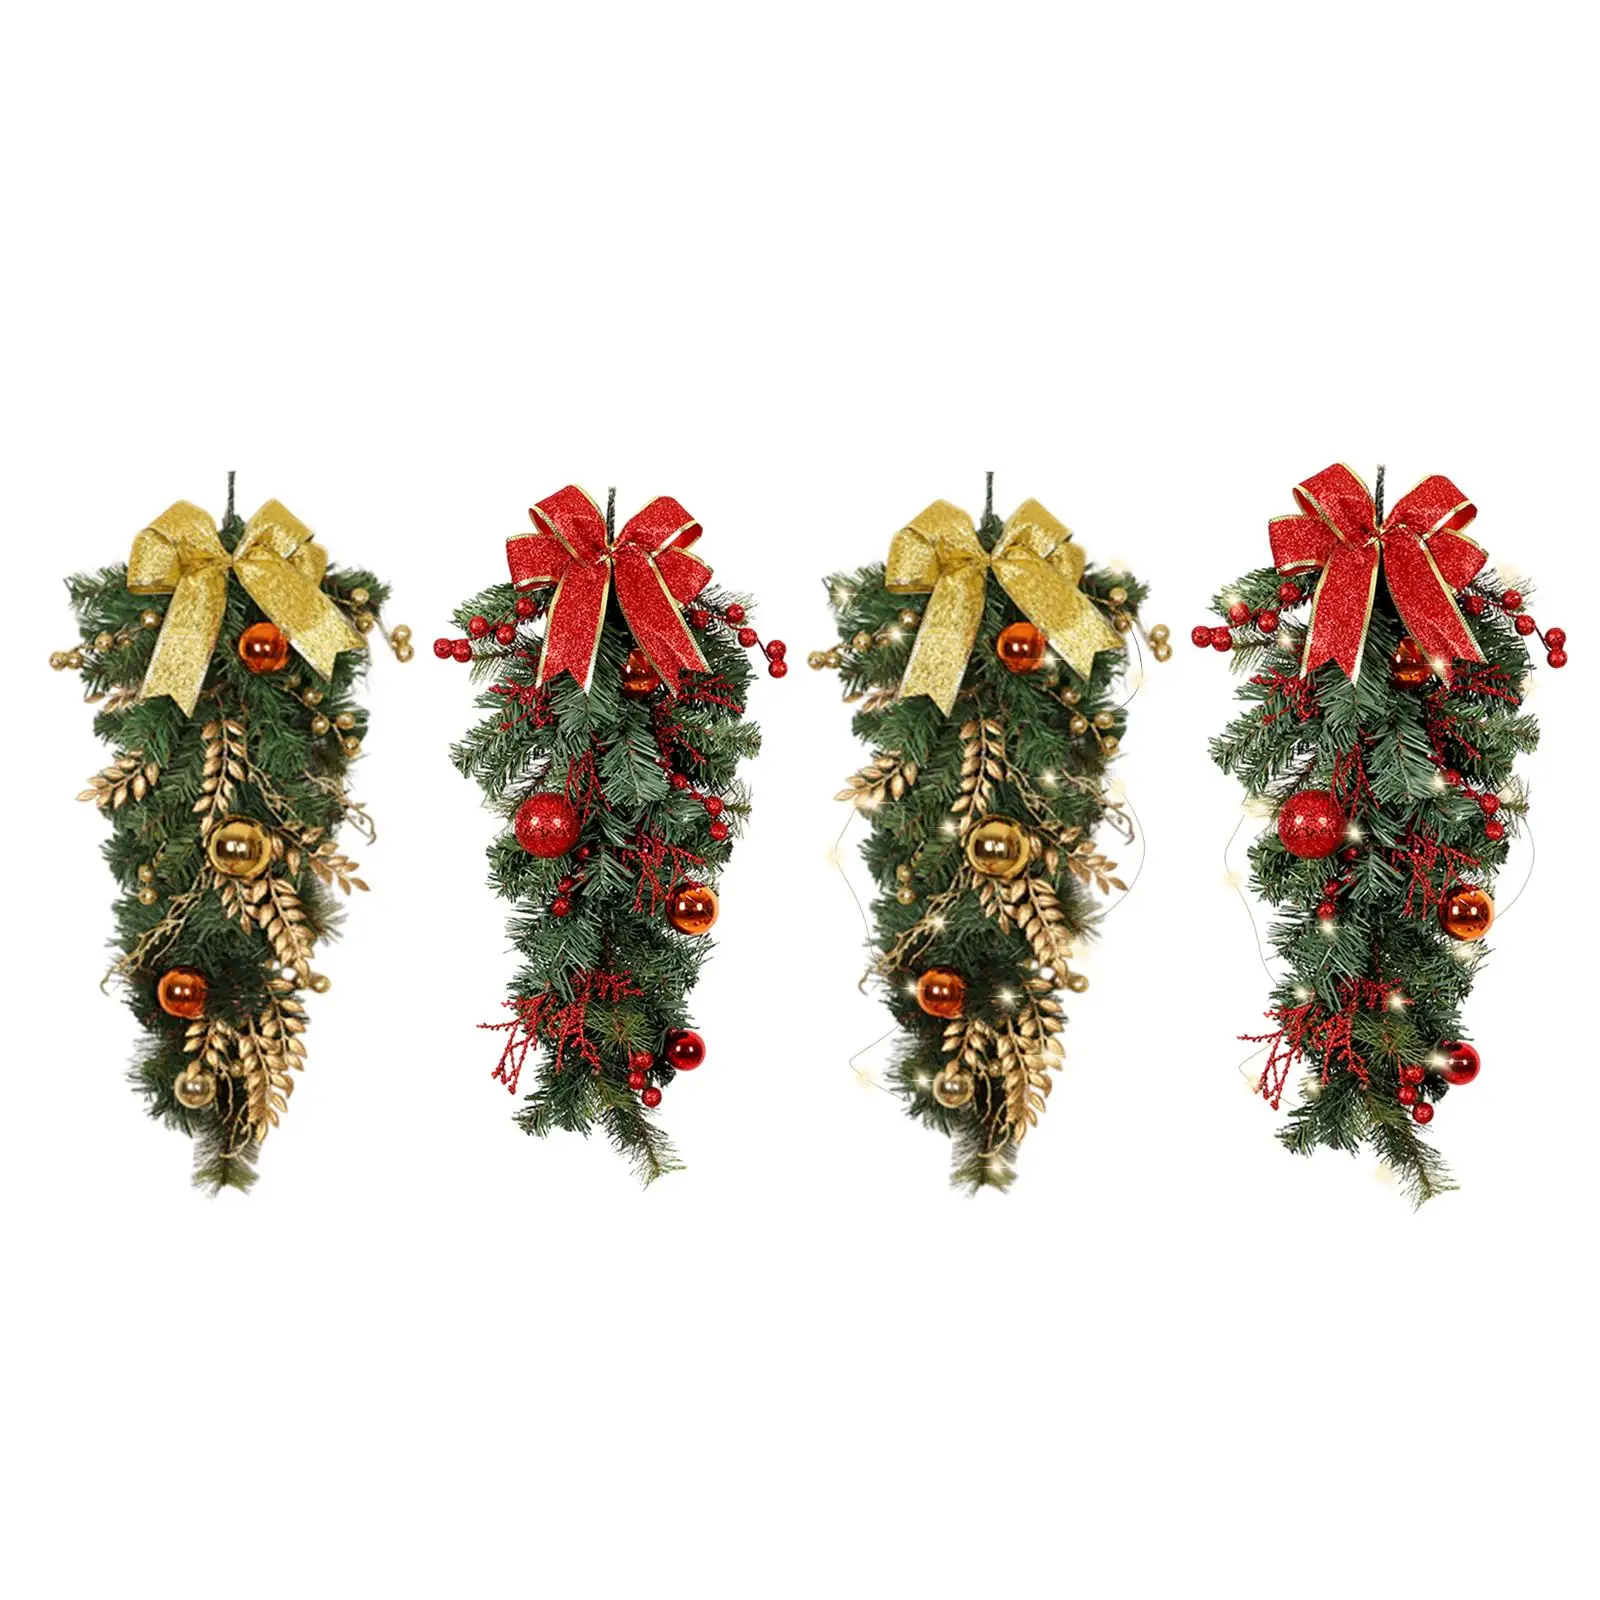 Hanging Christmas Upside Down Tree Simulated Leaves Colored Balls Christmas Garland for Wall Home Porch Hotel Windows